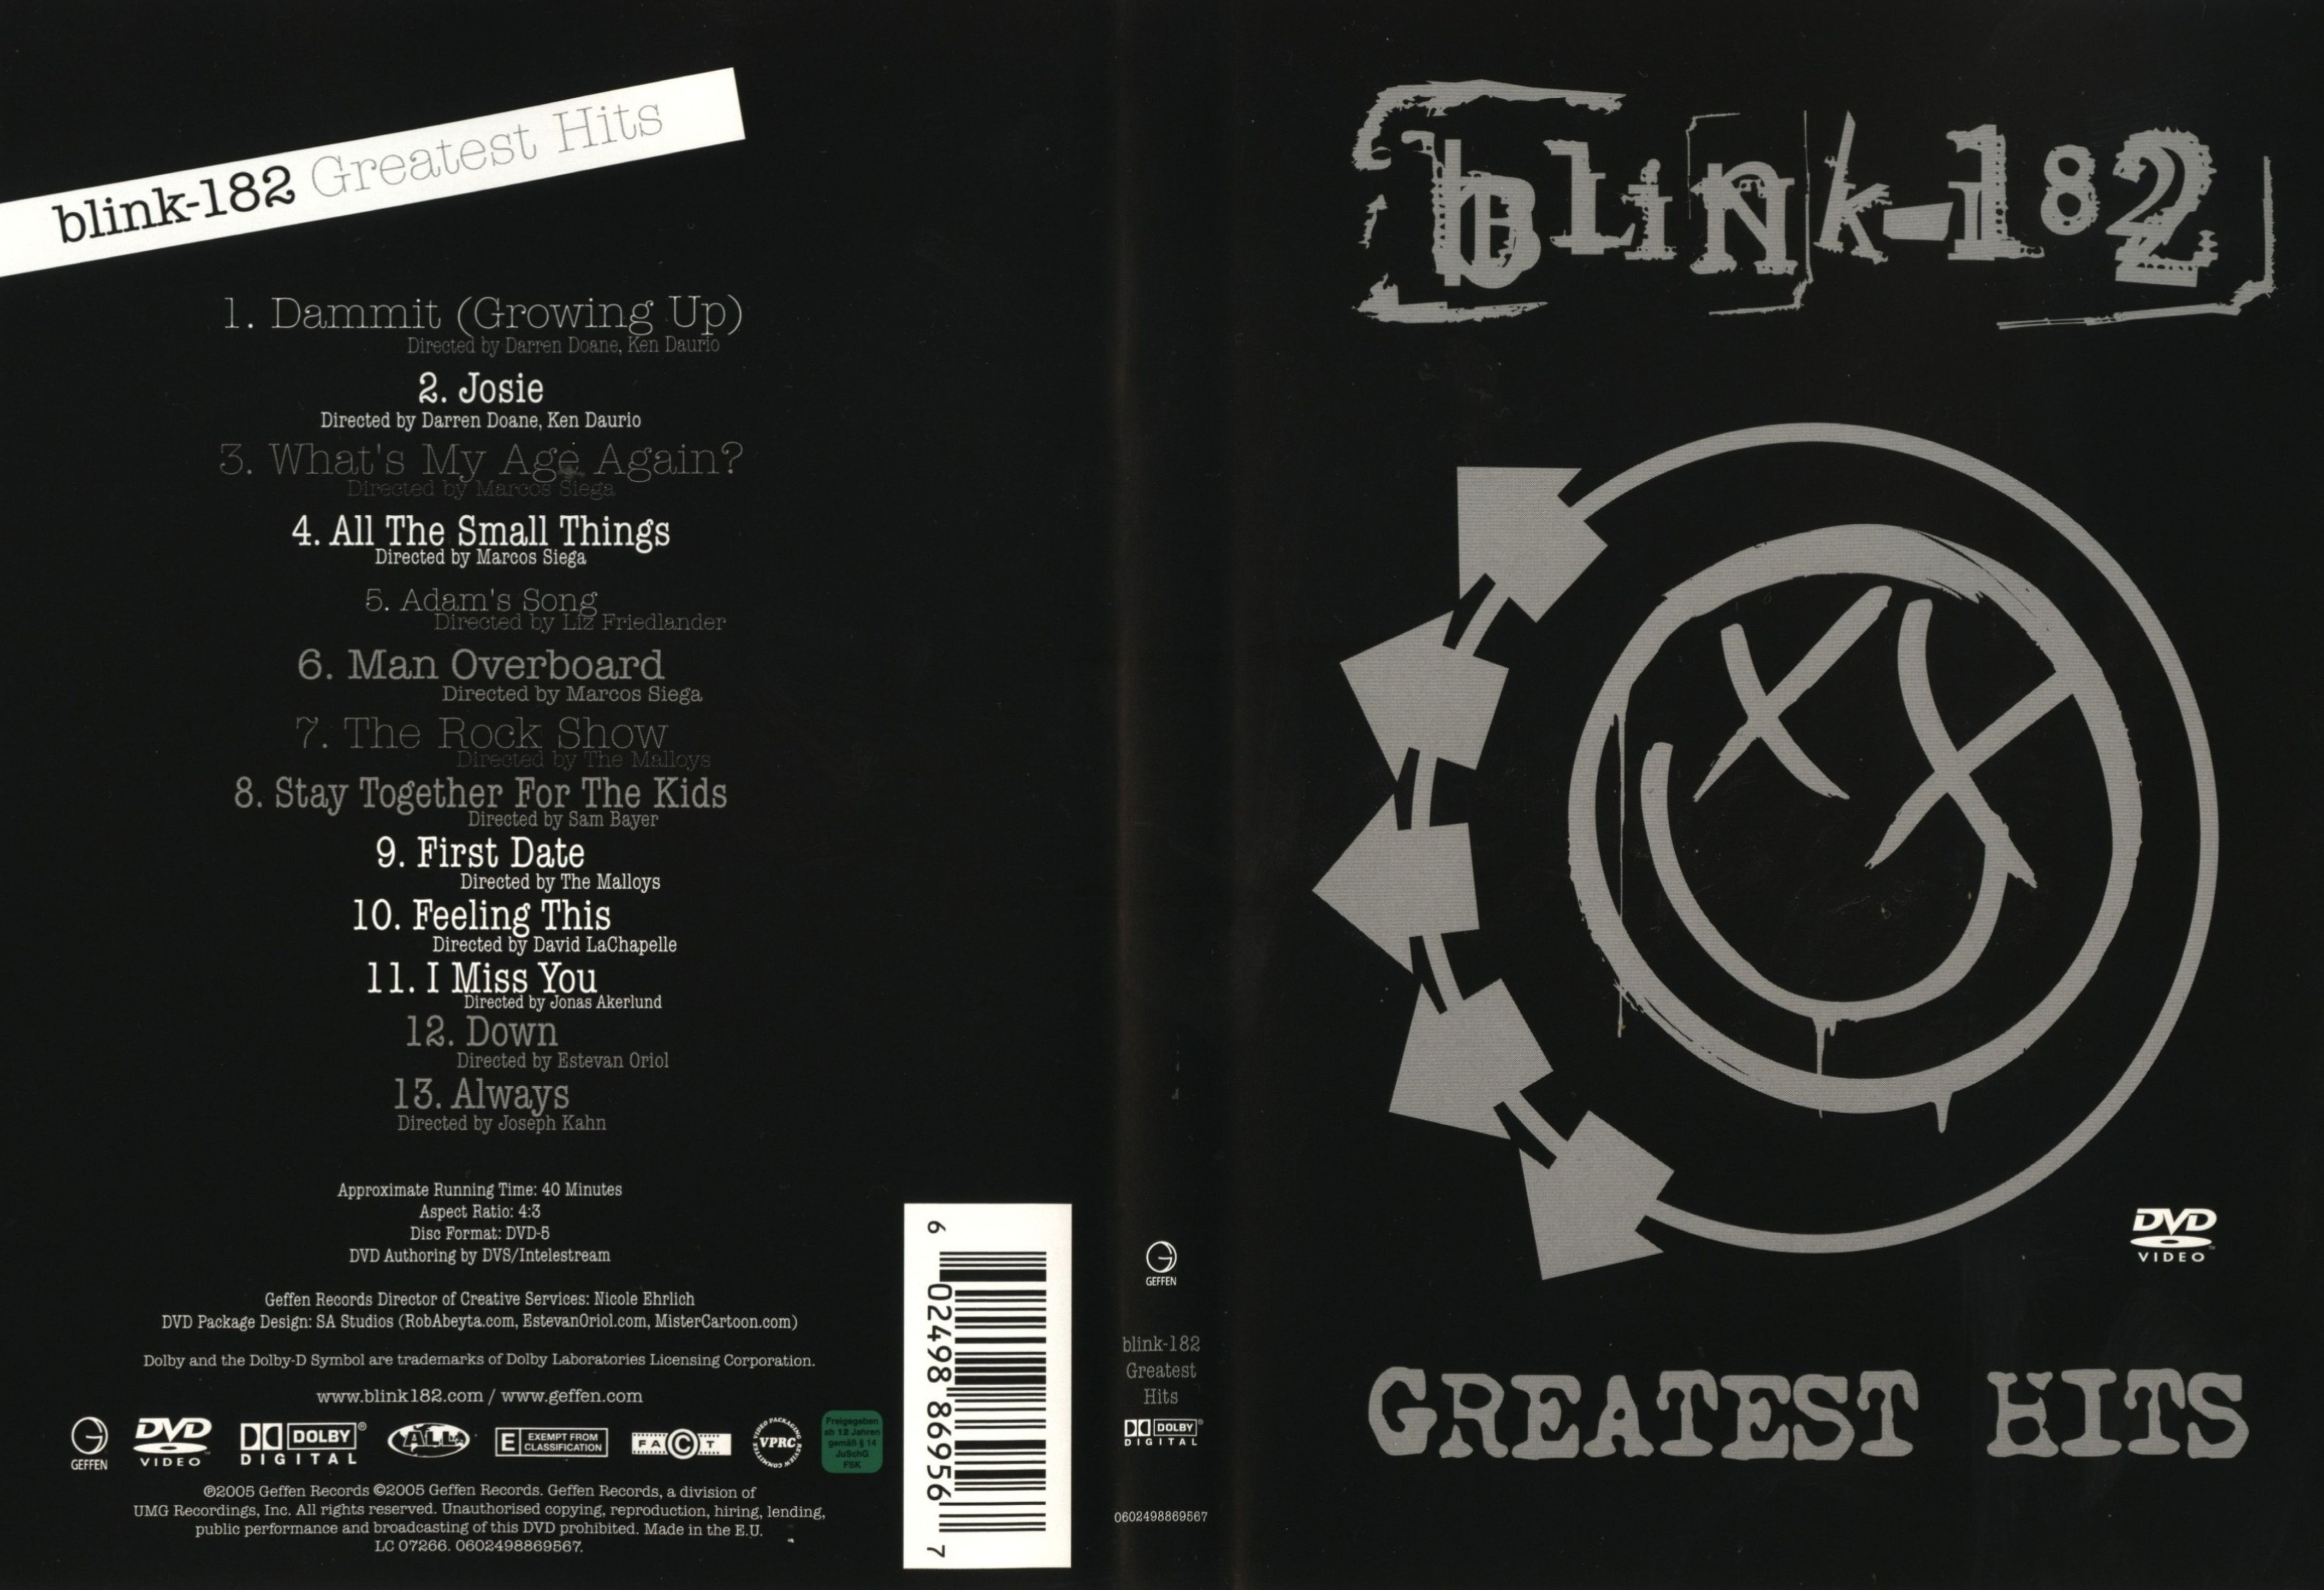 Jaquette DVD Blink 182 greatest hits